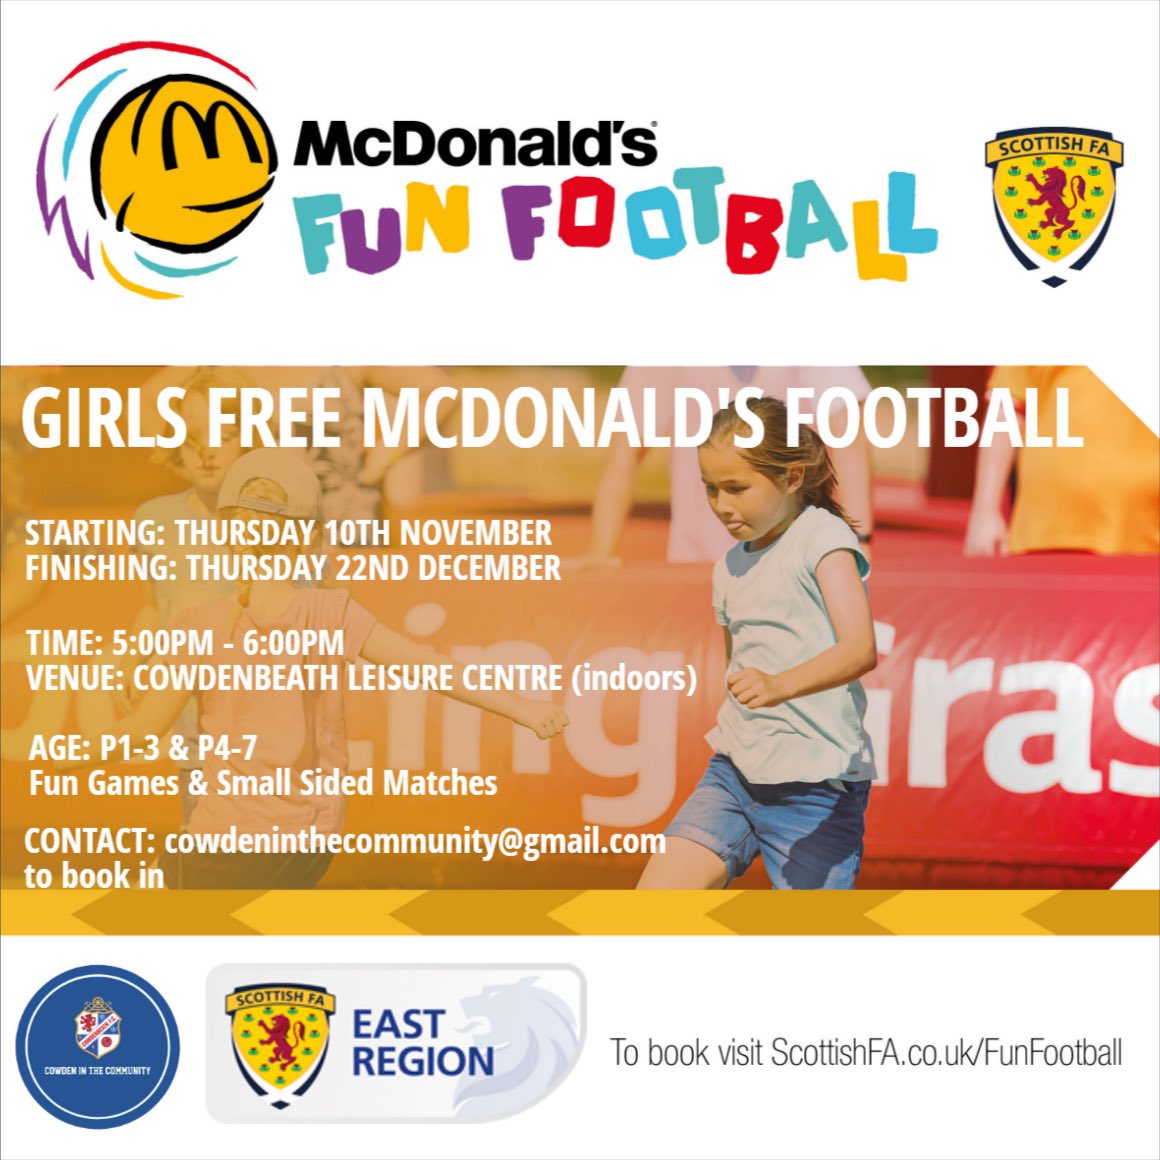 👧⚽️FREE GIRLS FOOTBALL⚽️👧 Check out our FREE GIRLS ONLY McDONALD’S FOOTBALL. For girls aged P1-3 & P4-7 #FunFootball